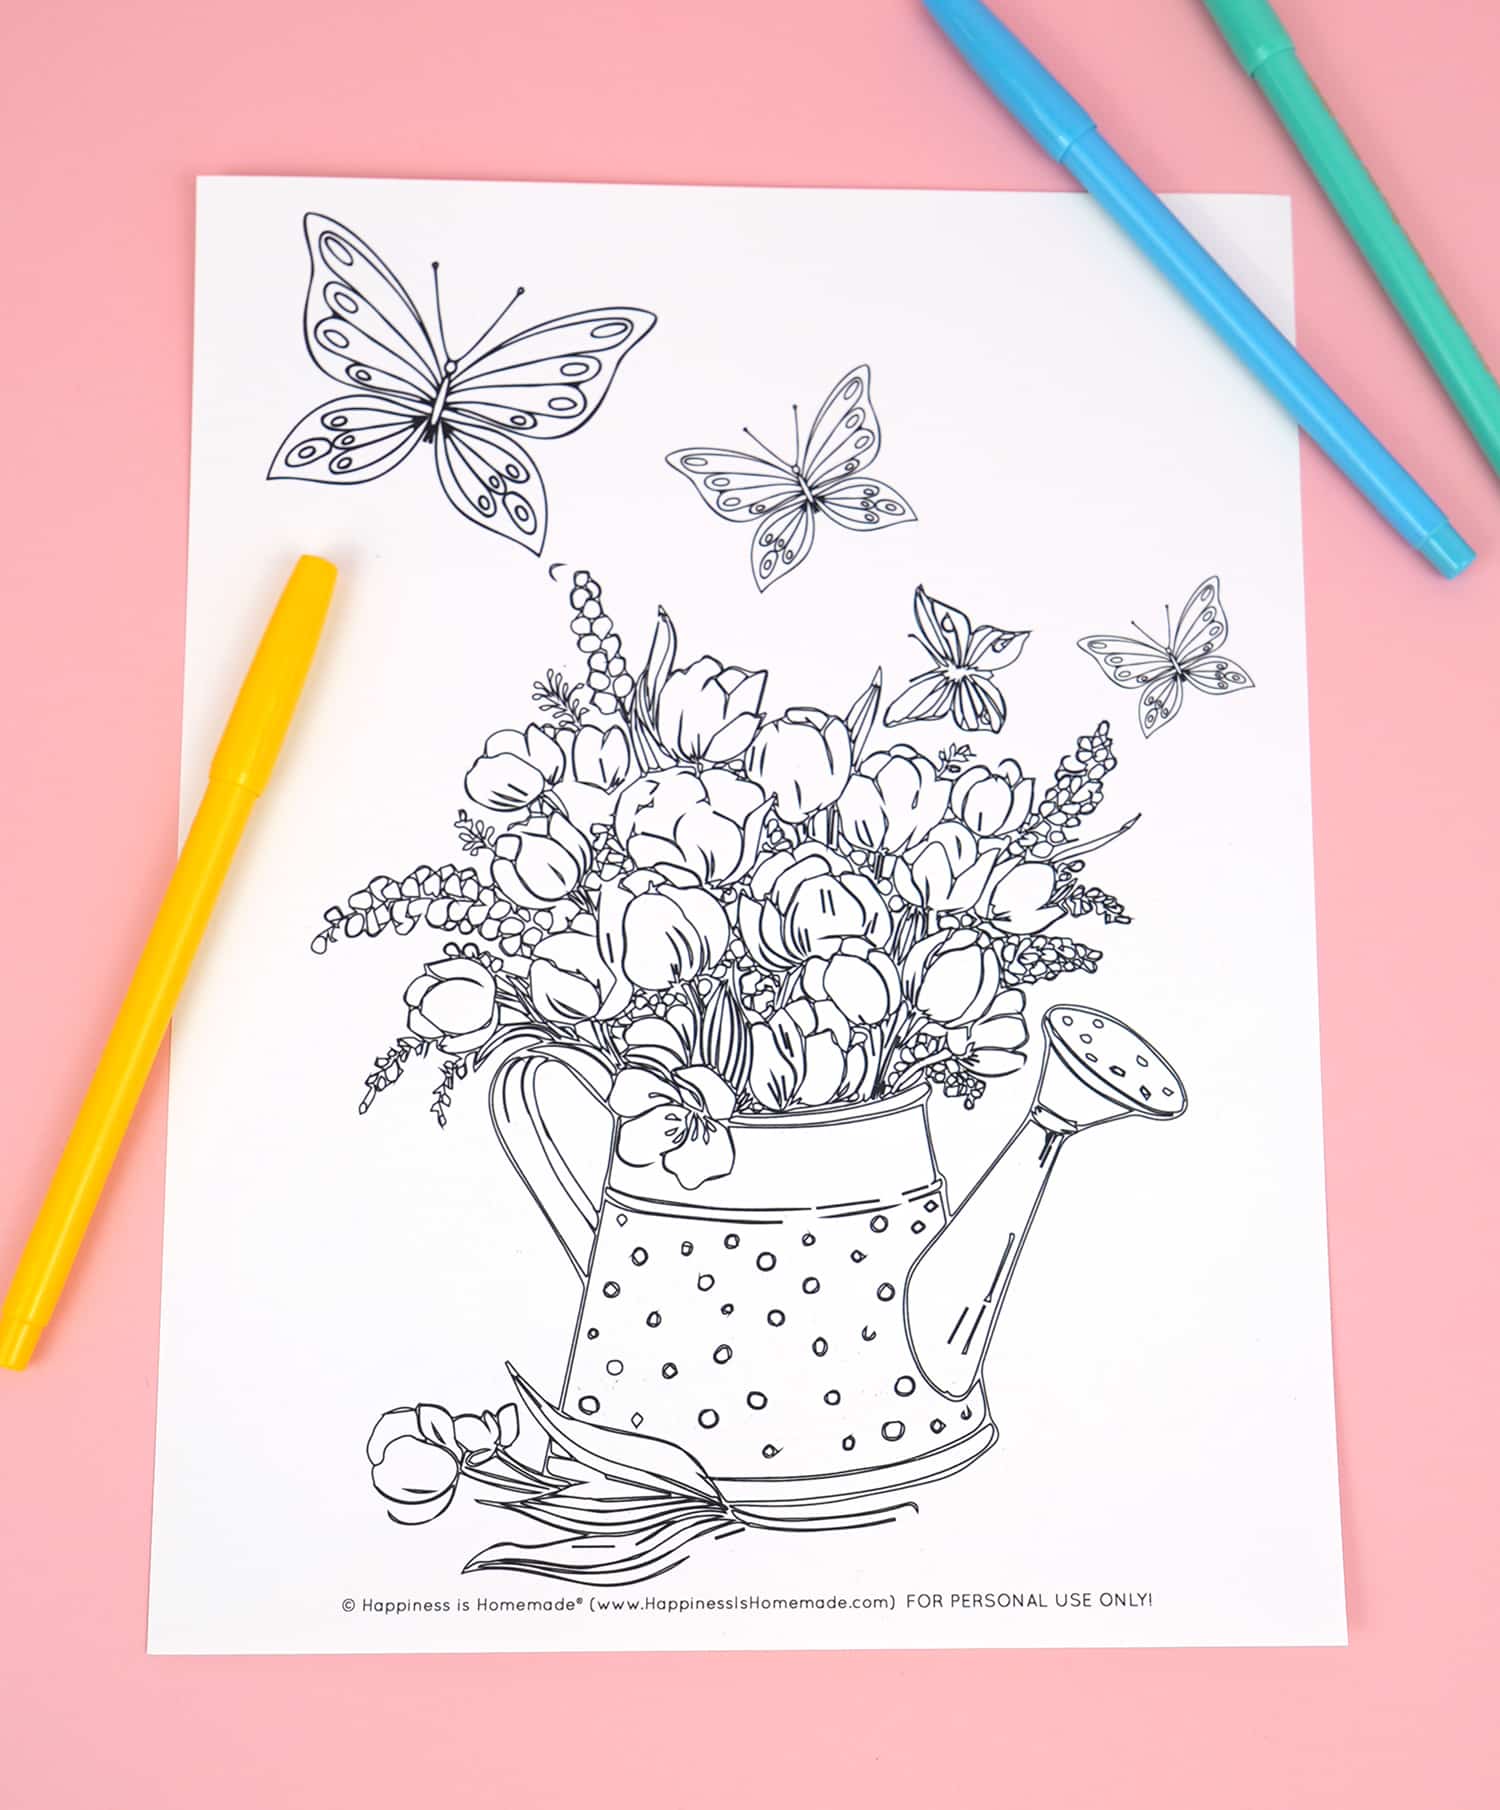 Coloring page featuring butterflies and watering can filled with flowers on pink background with markers